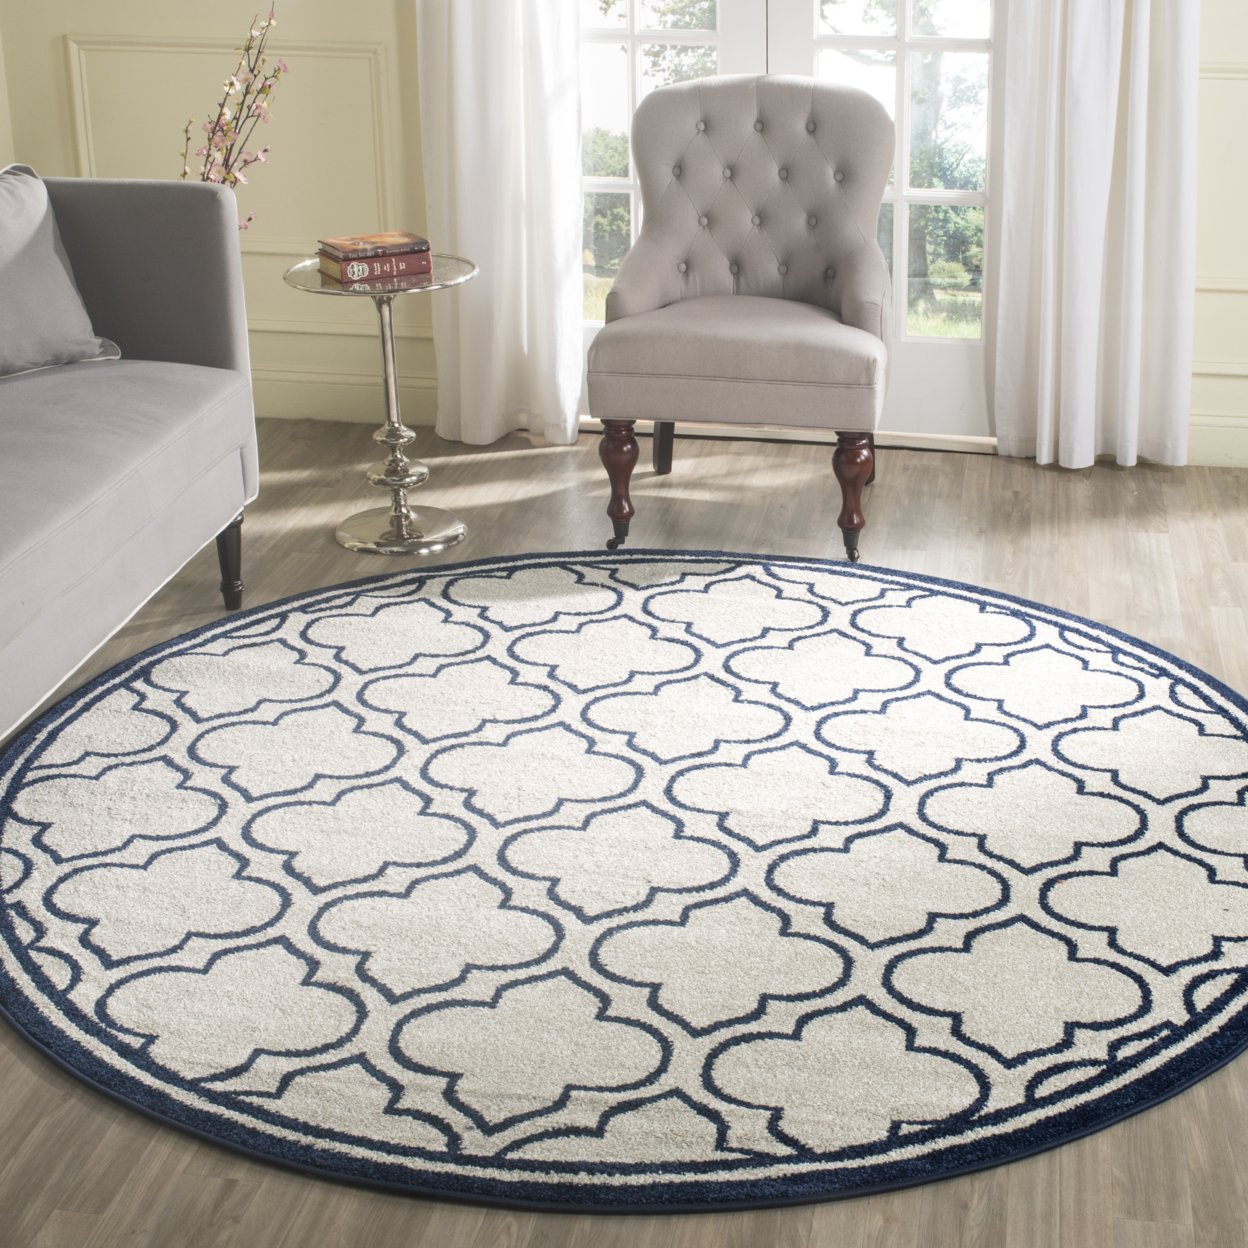 SAFAVIEH Amherst Collection AMT412M Ivory / Navy Rug - 3' X 5'